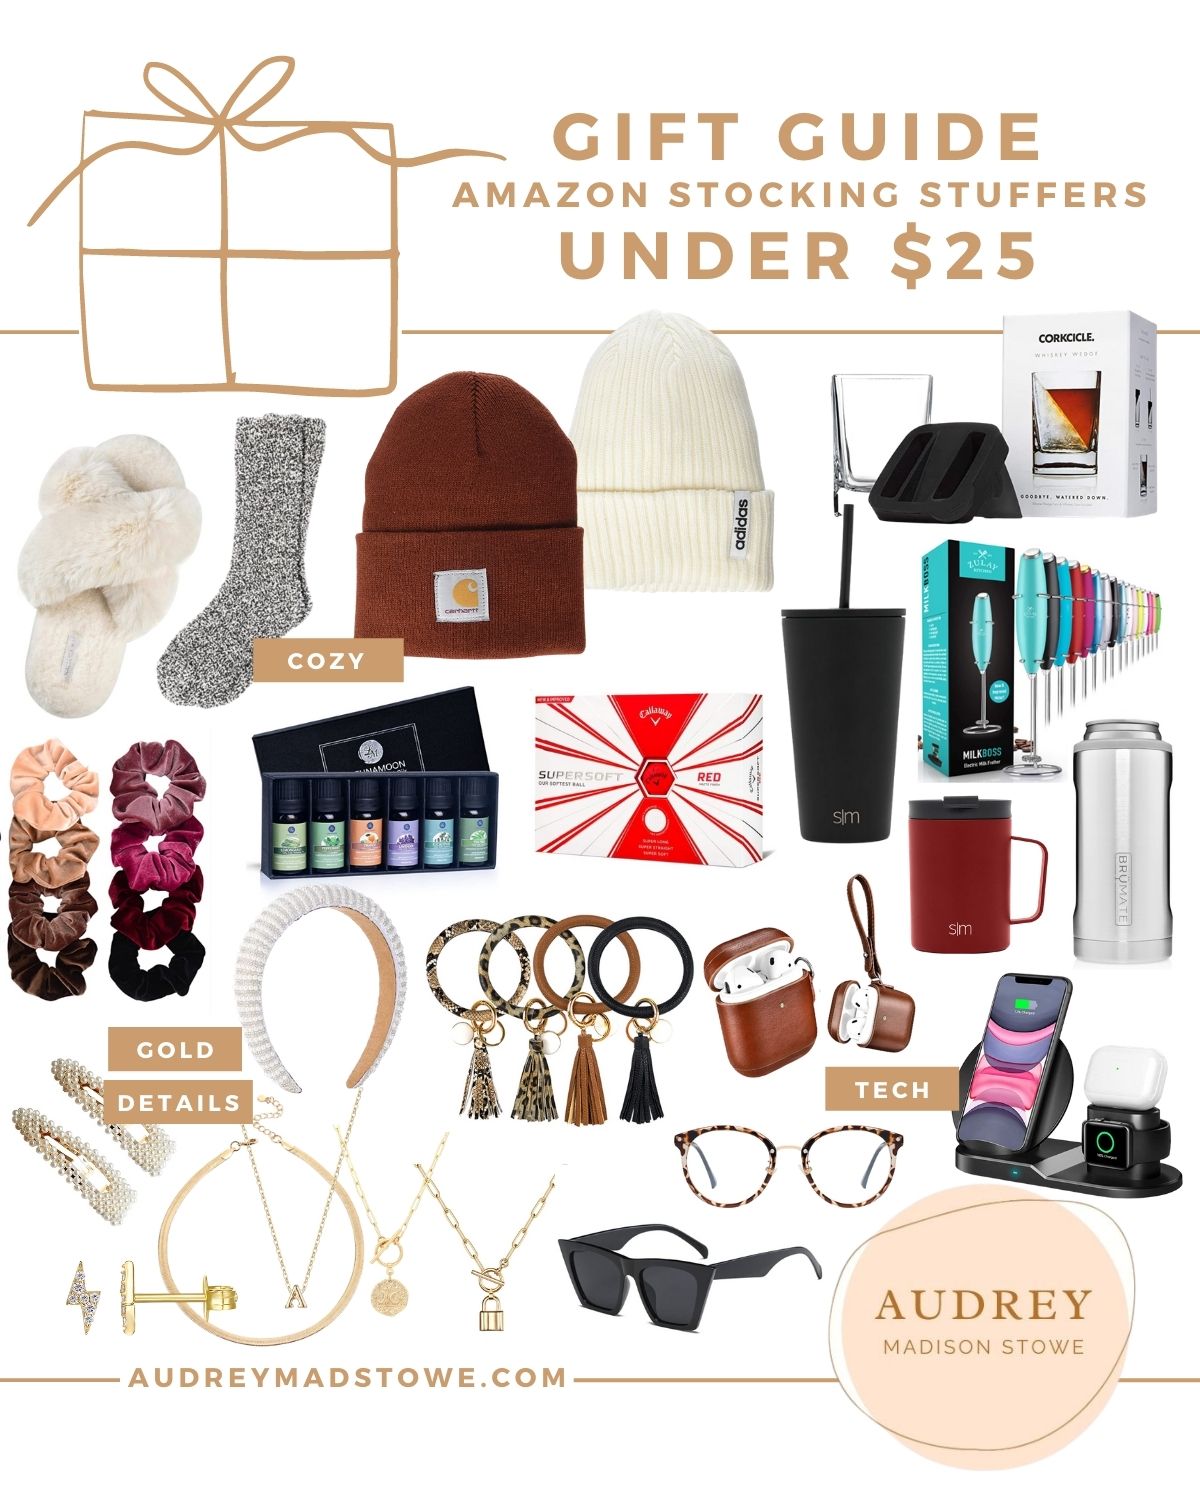 Holiday Deals Under $25: Grab Last-Minute Stocking Stuffers and